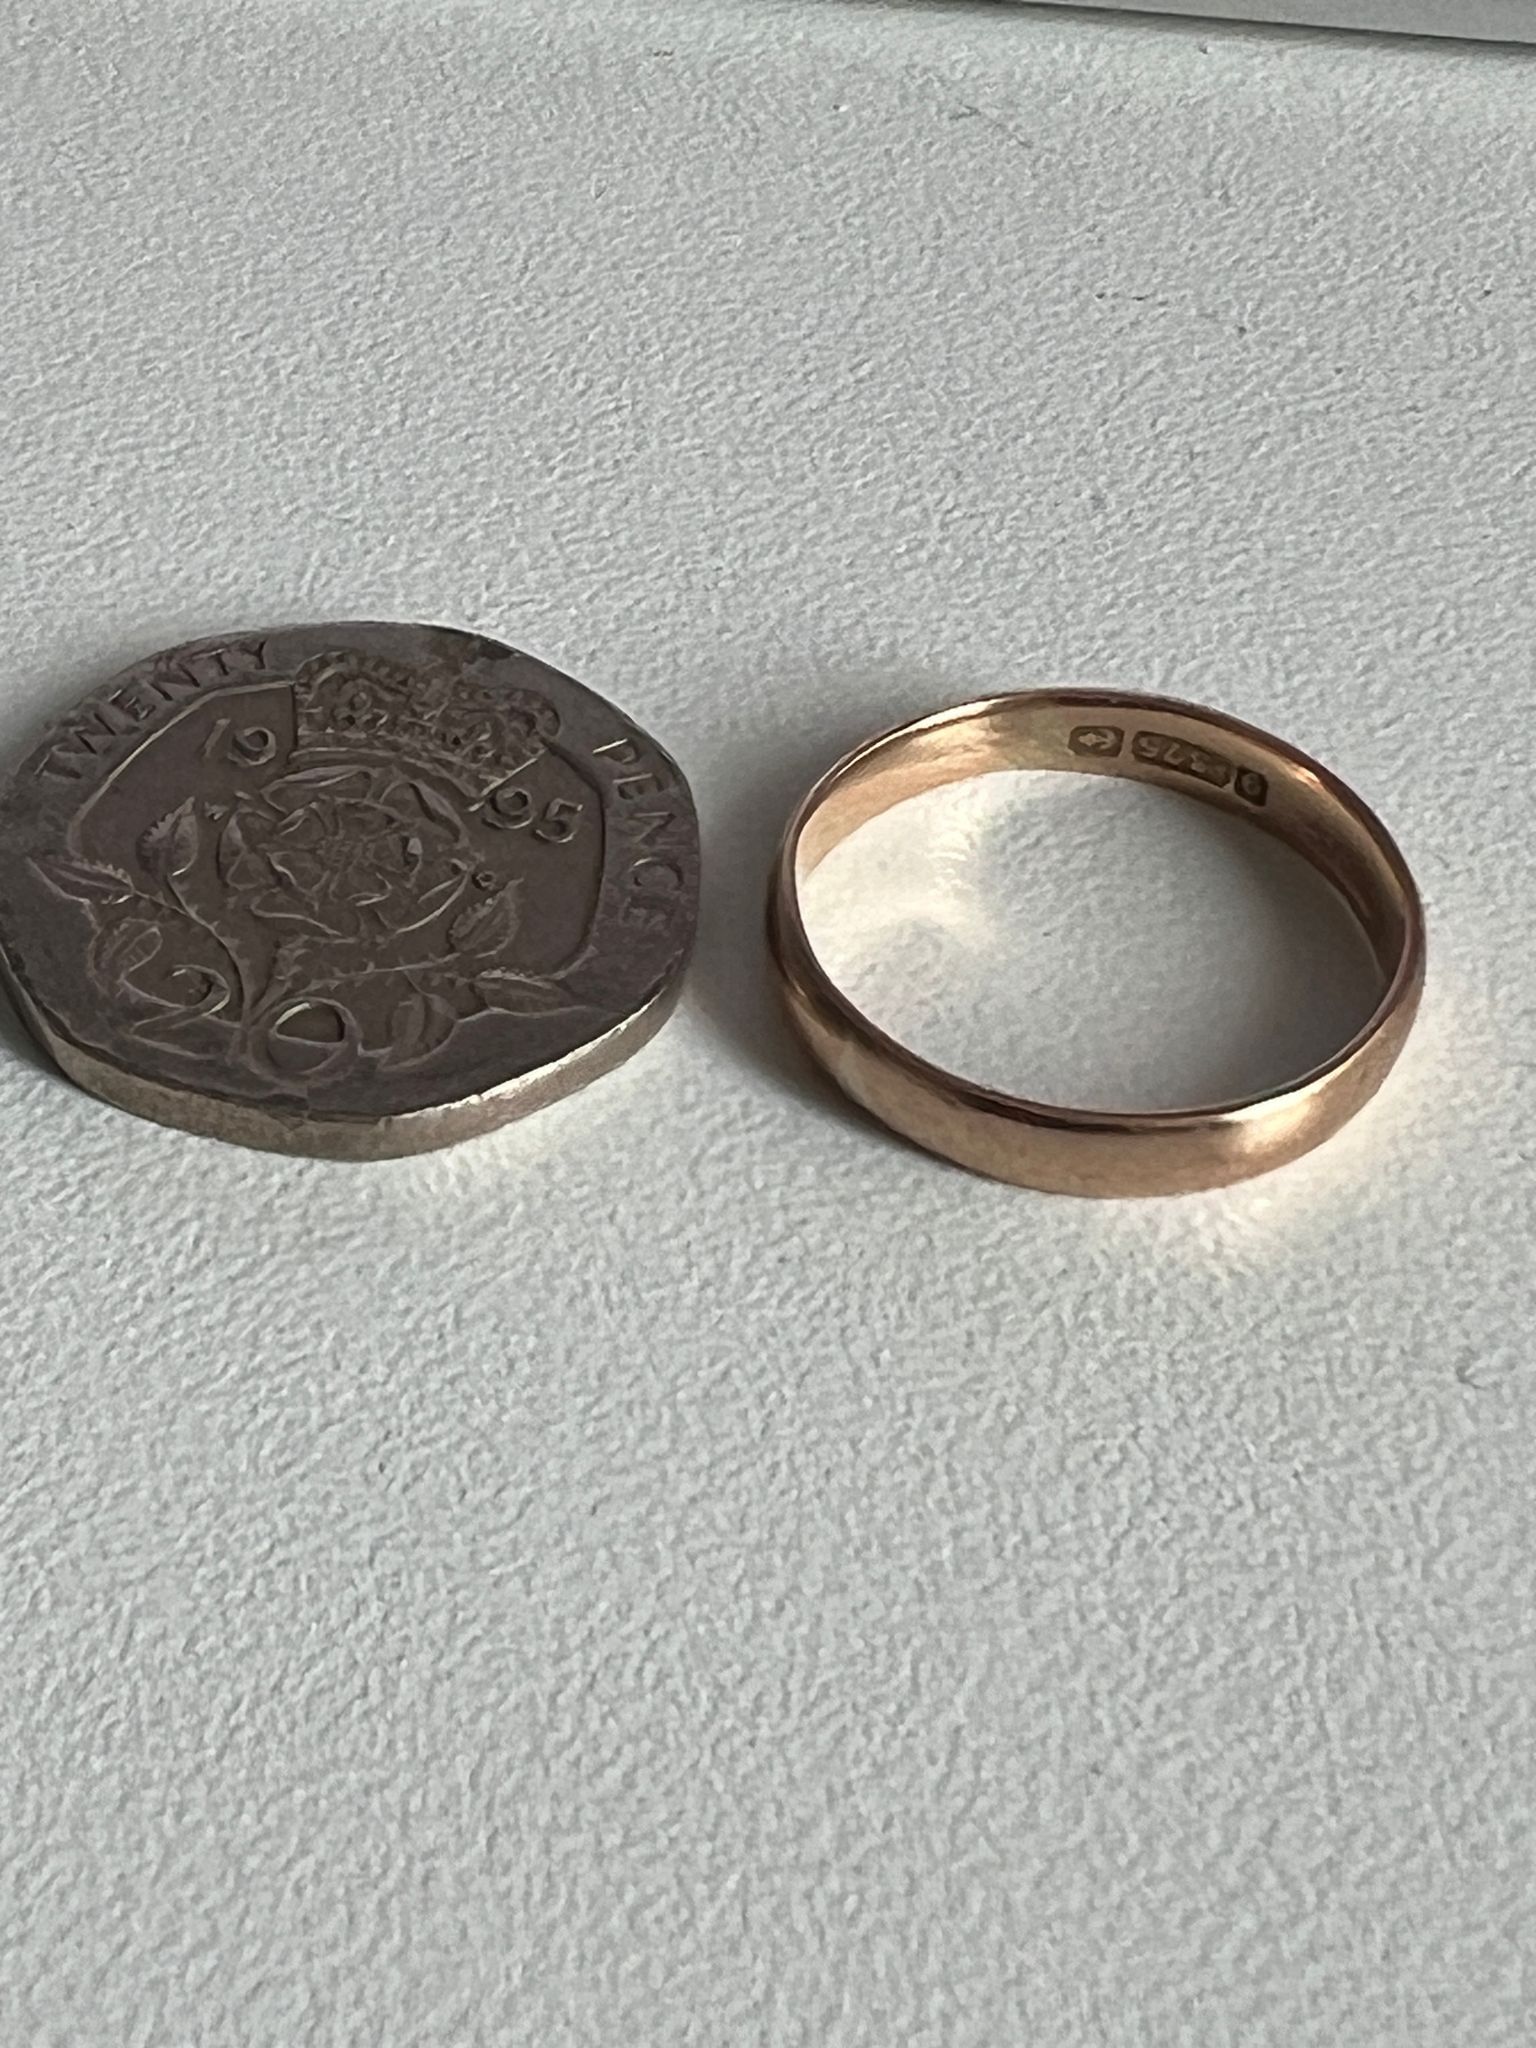 student technician reunited with ring which has been in his family for 100 years